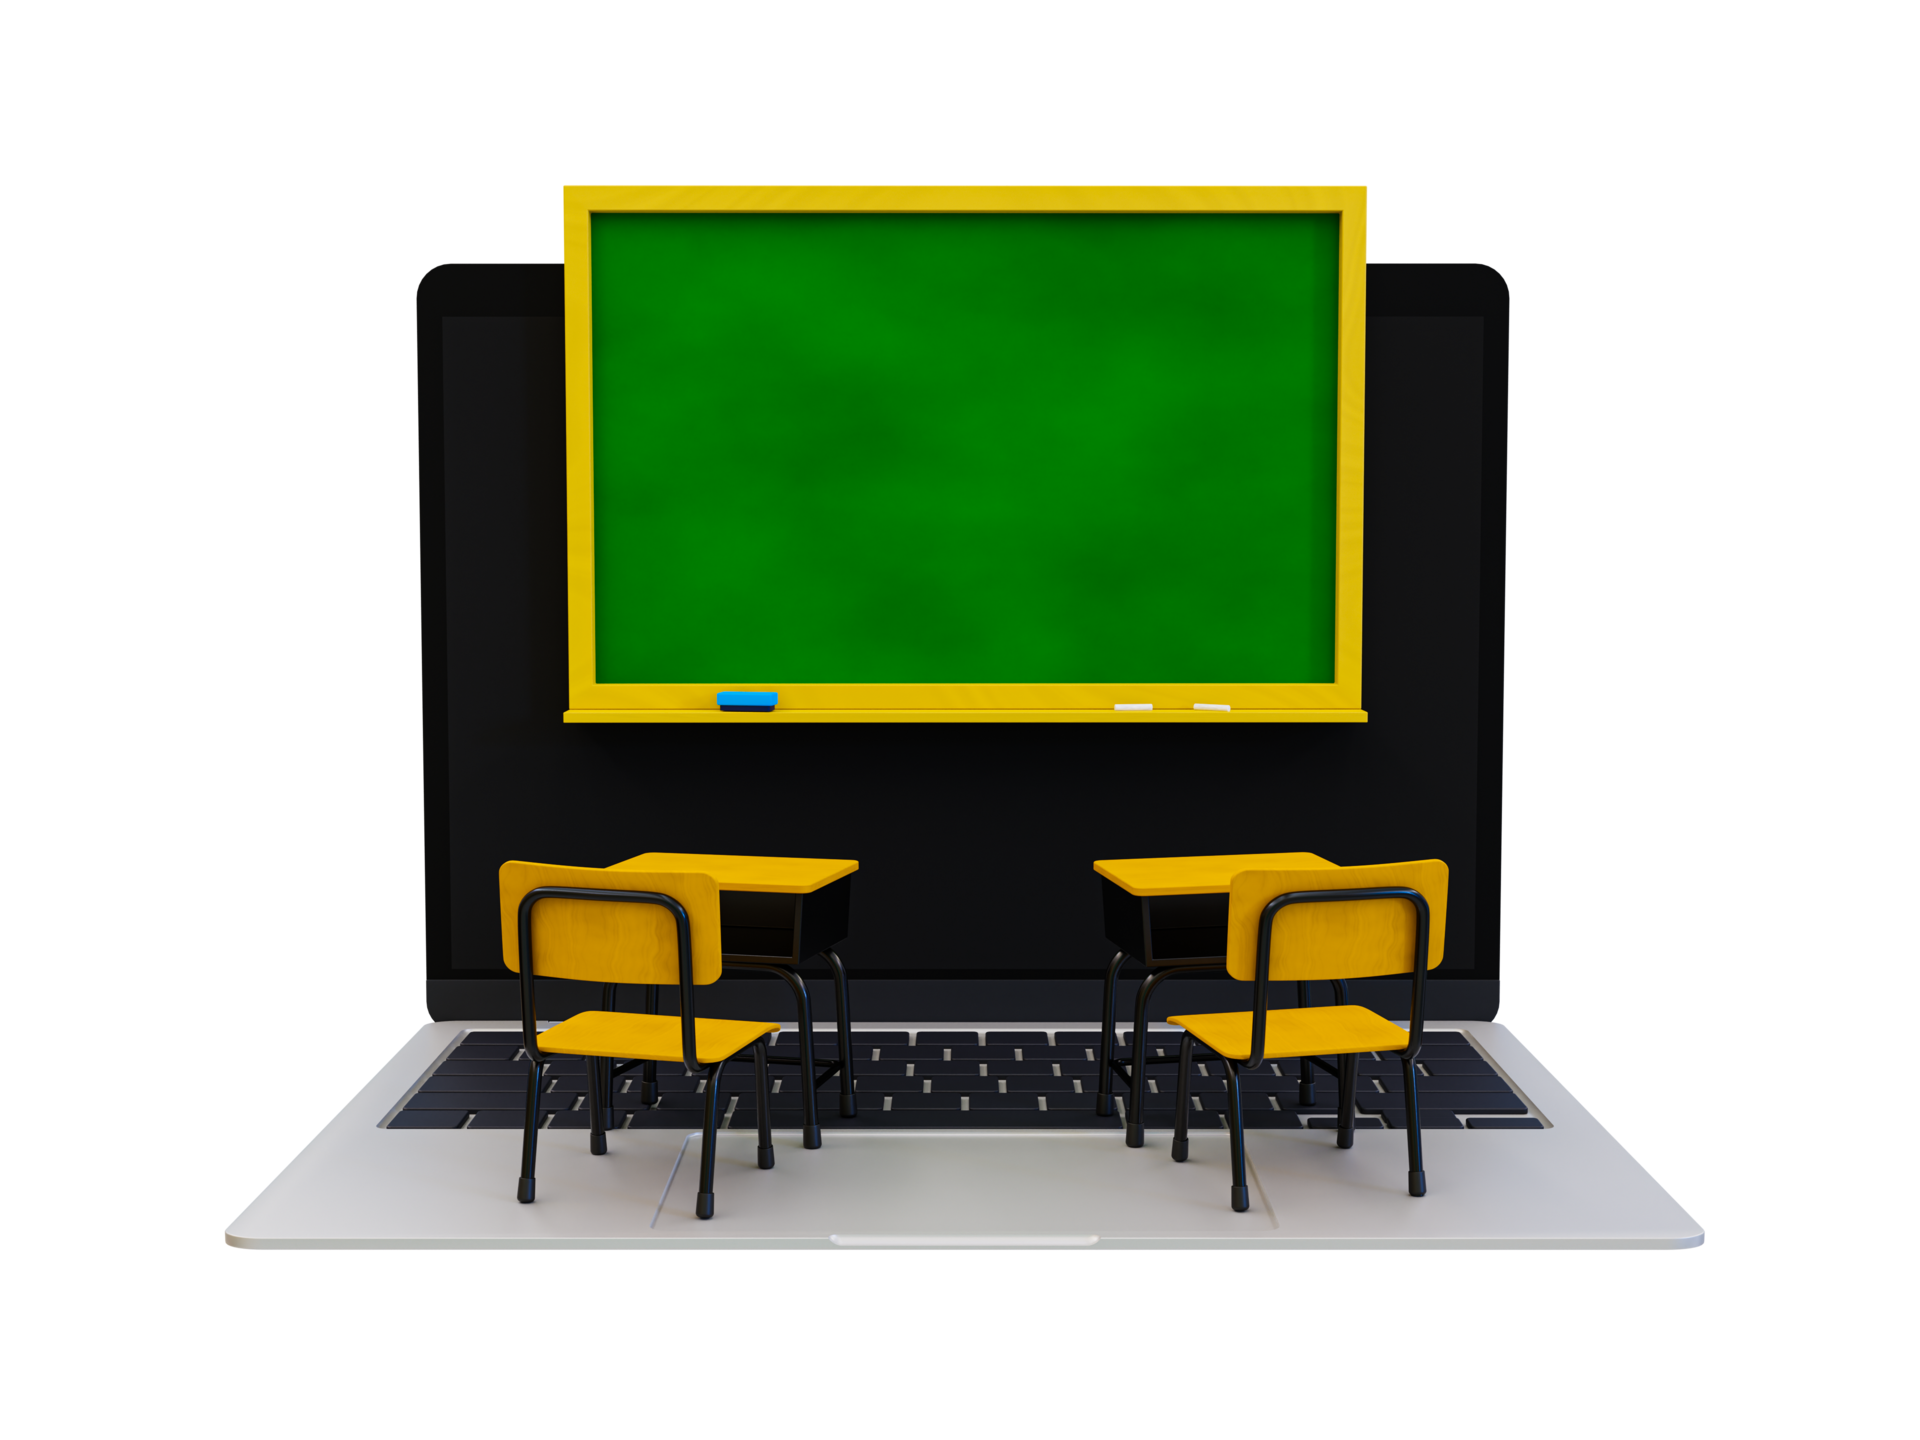 Desk Is Set Up In A Classroom Background, 3d Illustration, School Classroom  With A Smartphone In Front, E Learning And Online Education Concept  Background Image And Wallpaper for Free Download